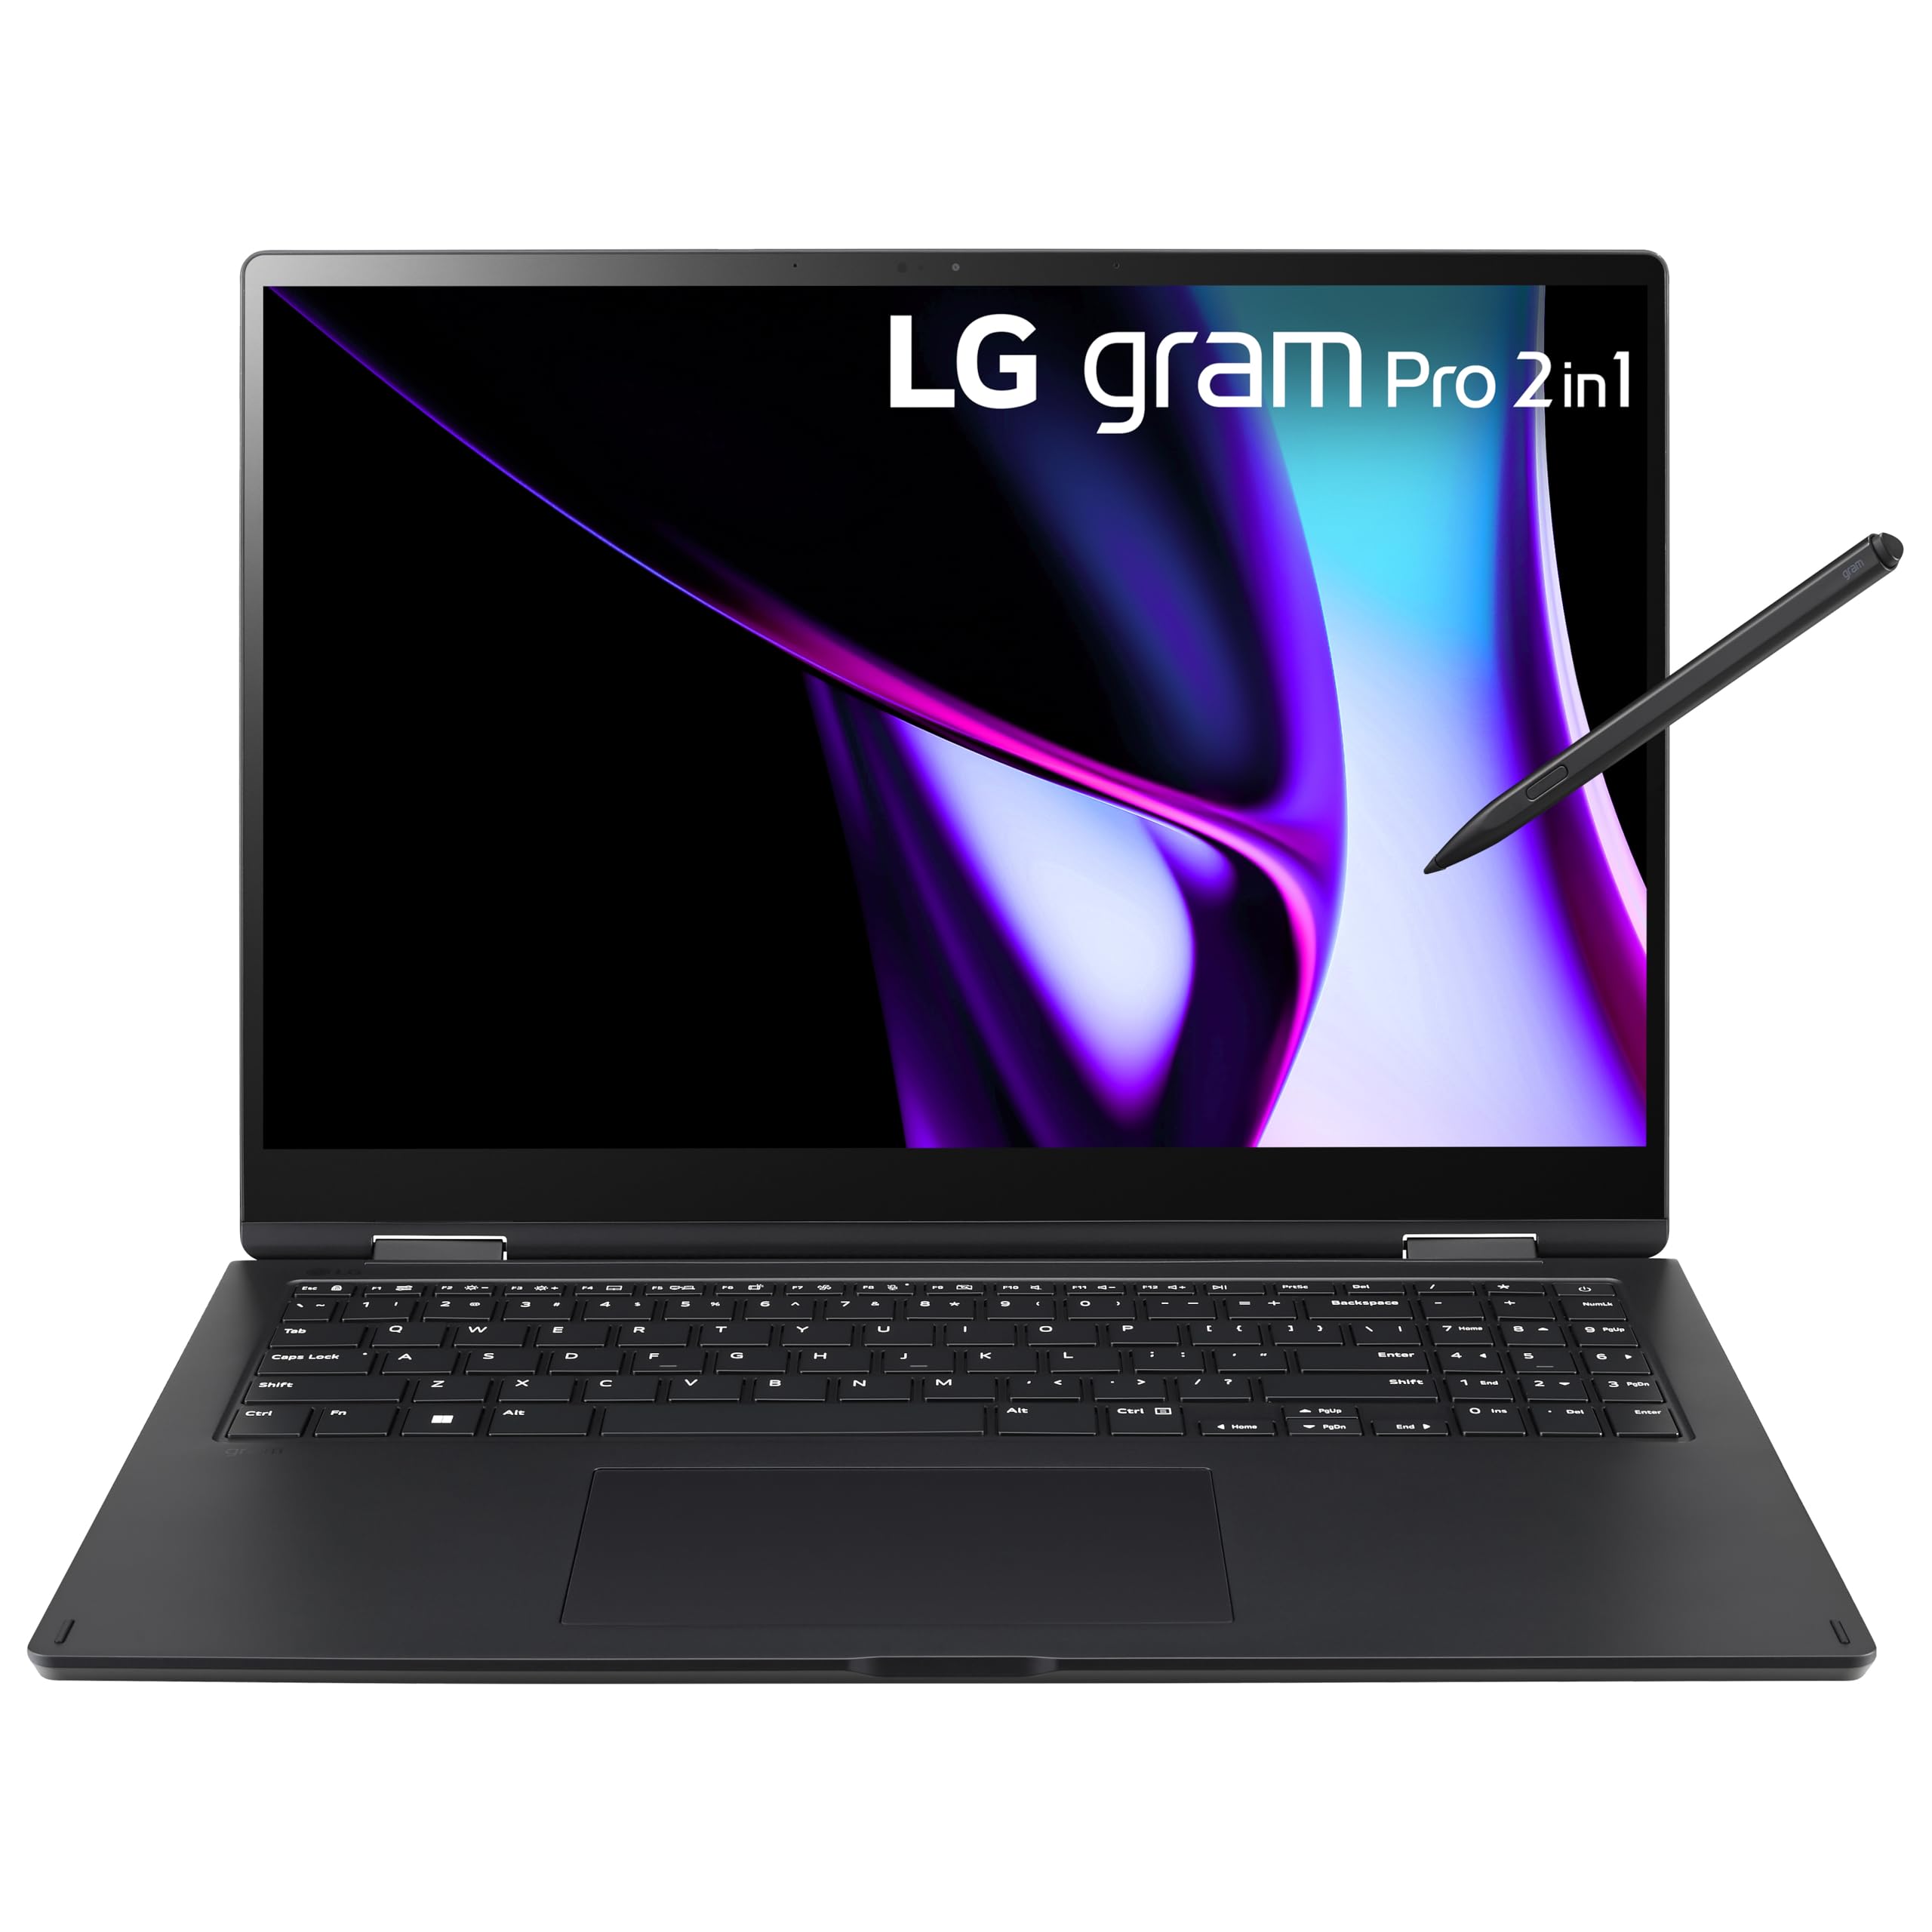 LG Gram Pro 2in1 16-inch Lightweight and Versatile Laptop, Intel Evo Edition - Intel Core Ultra 7, 32GB RAM, 2 TB SSD with OLED Touch Display